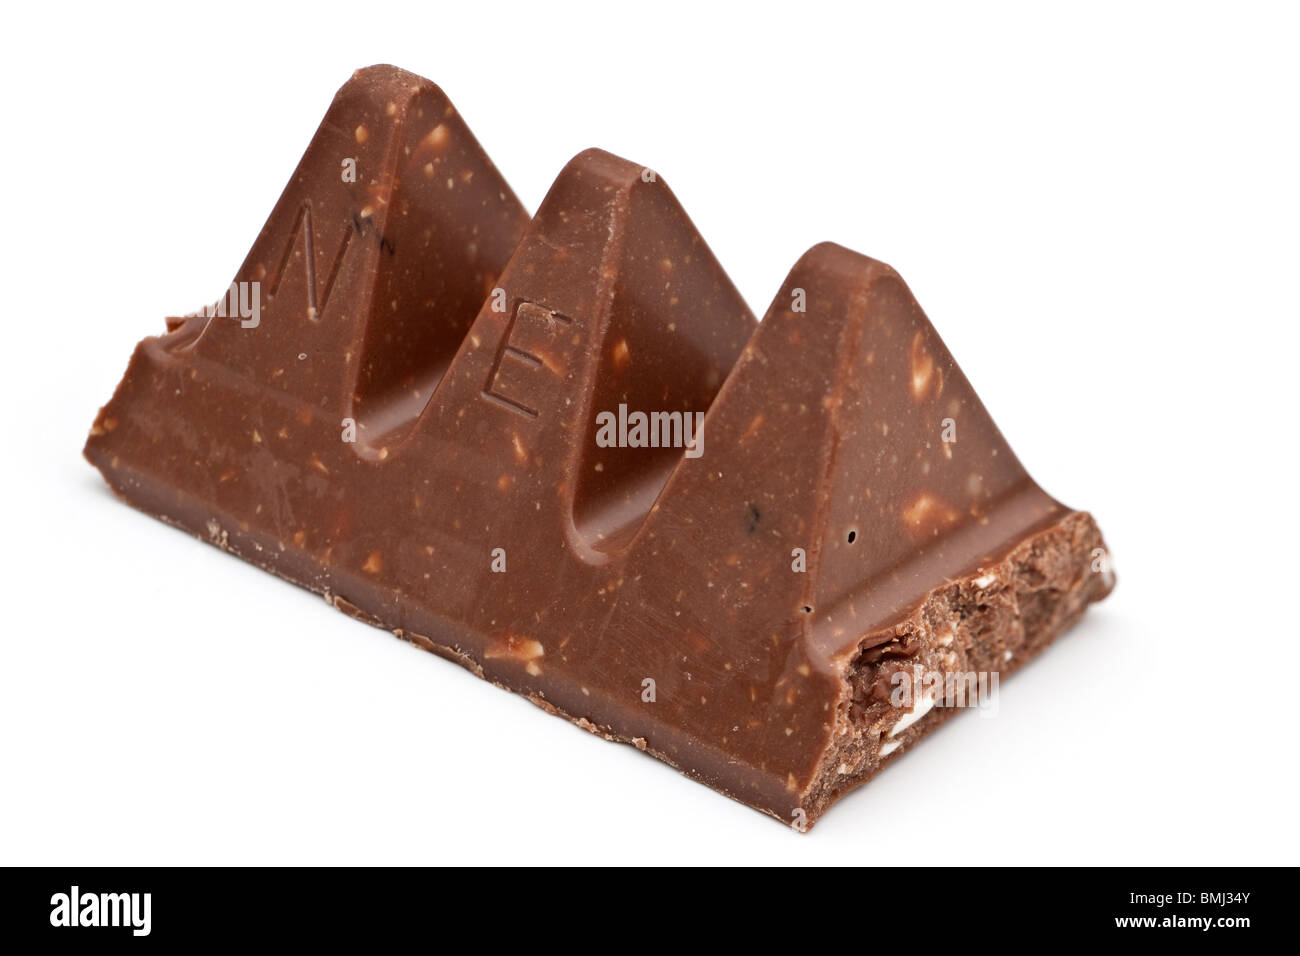 Three pieces of Toblerone fruit and nut chocolate Stock Photo